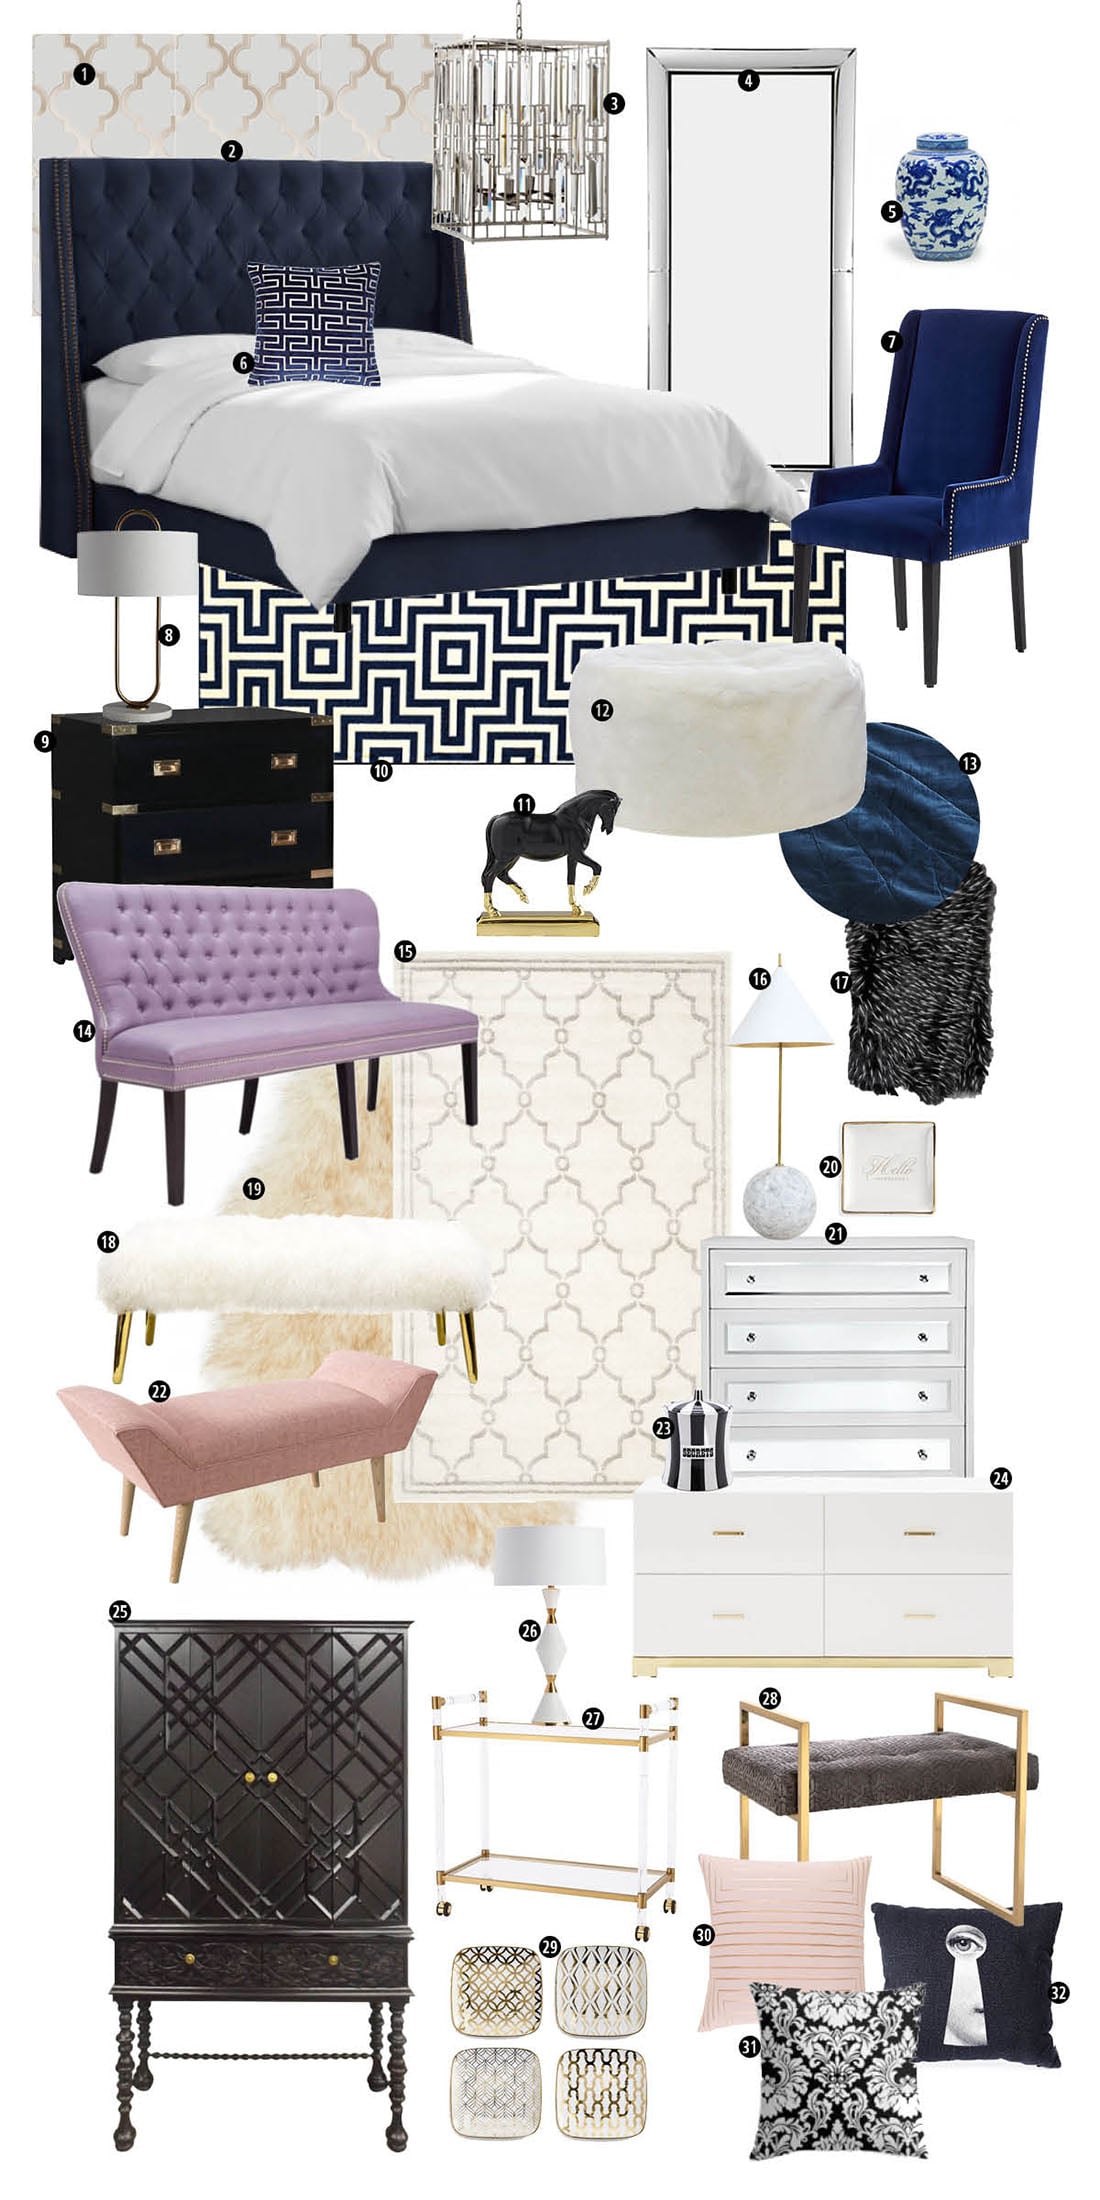 8 Signs Modern Glam Decor is the Right Home Style for You • Little Gold Pixel • Click through to find out if you're compatible with Modern Glam decor!